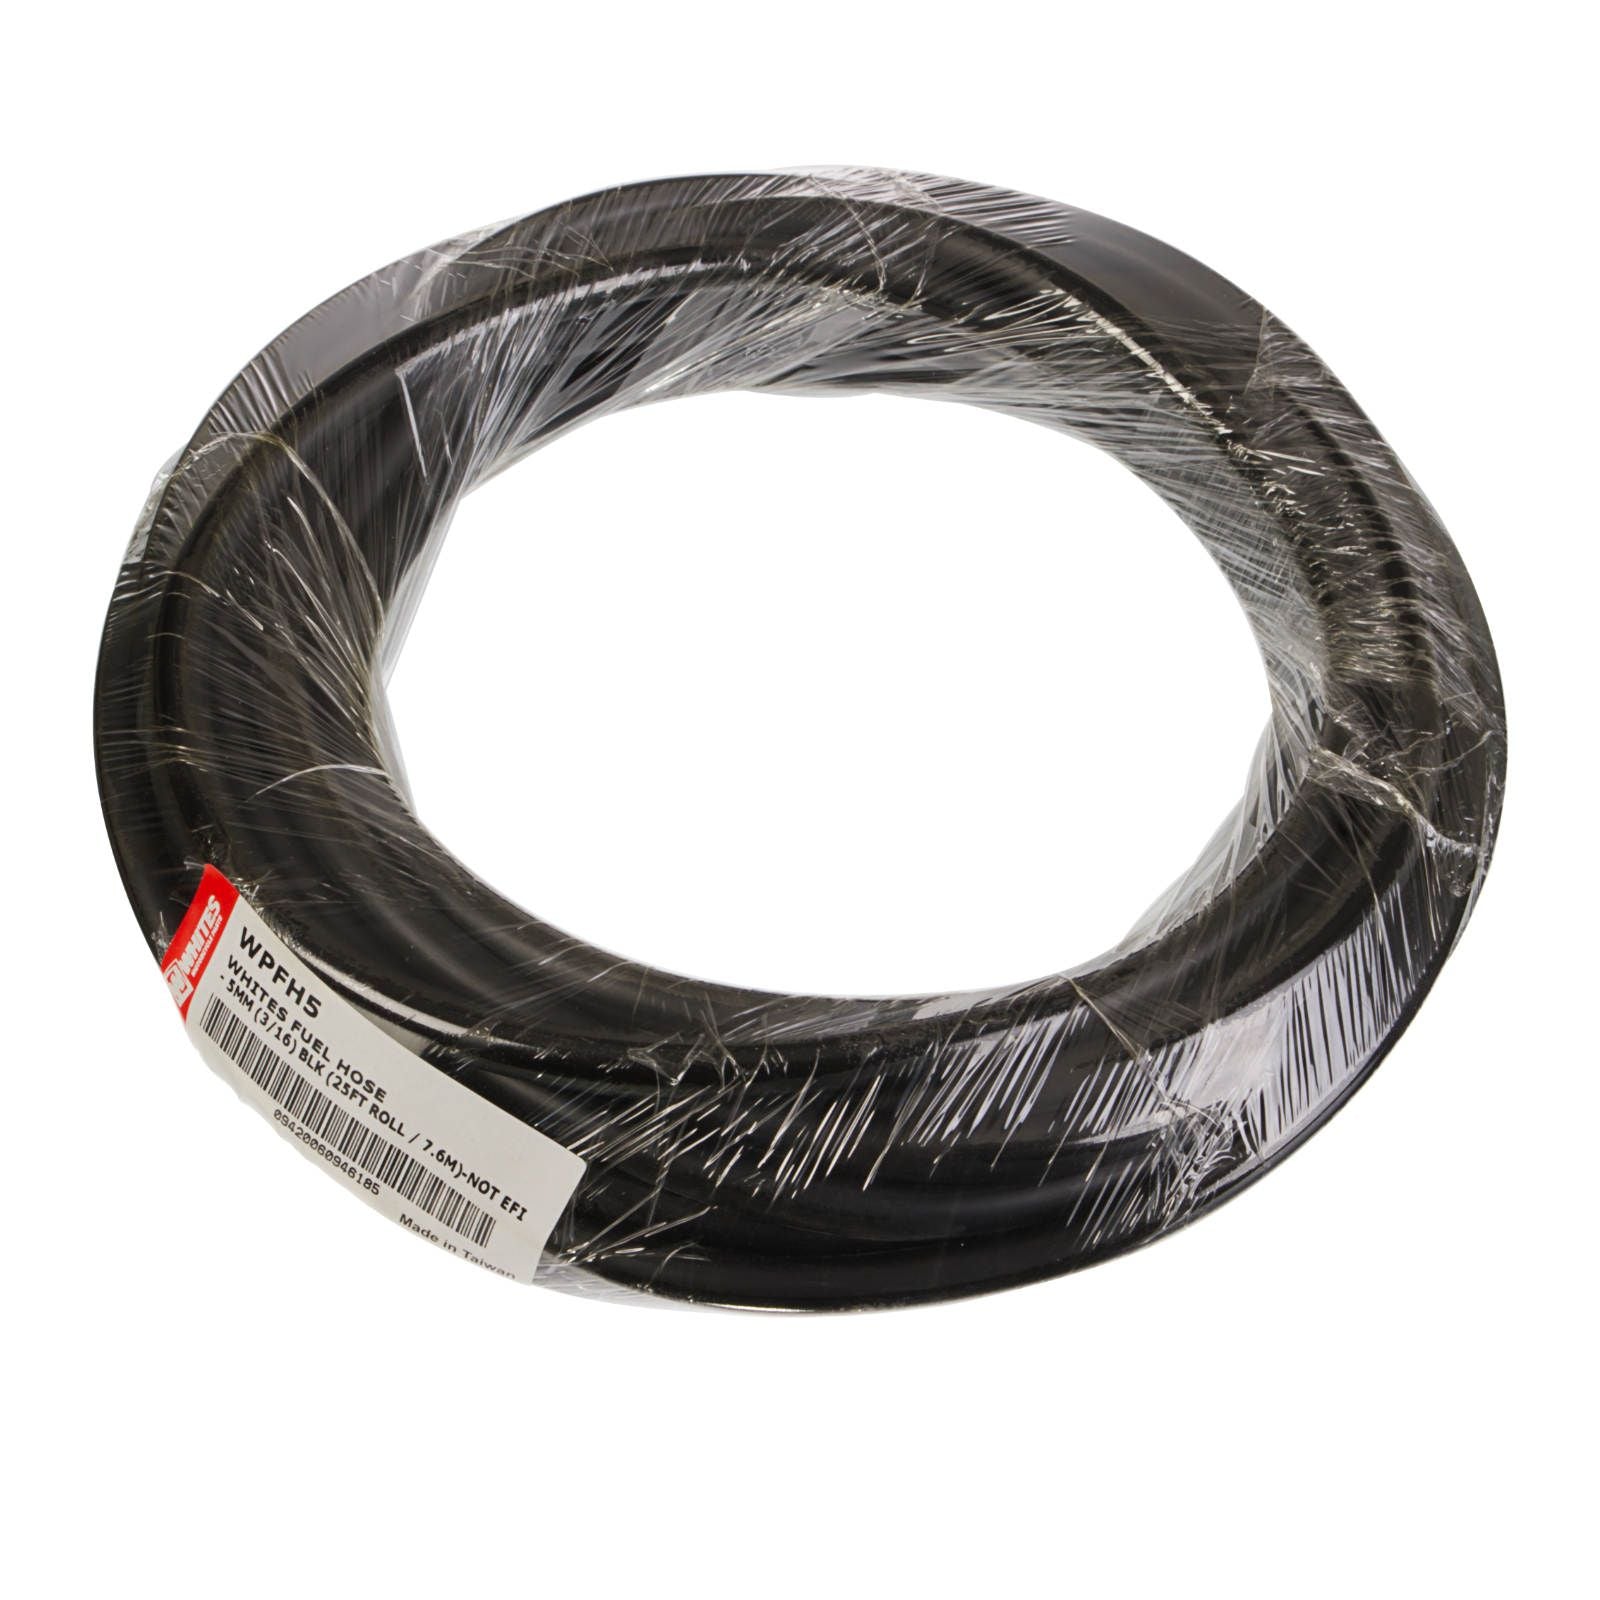 New WHITES Fuel Hose - 5mm (3/16) Blk (25Ft Roll / 7.6M)-Not Efi #WPFH5